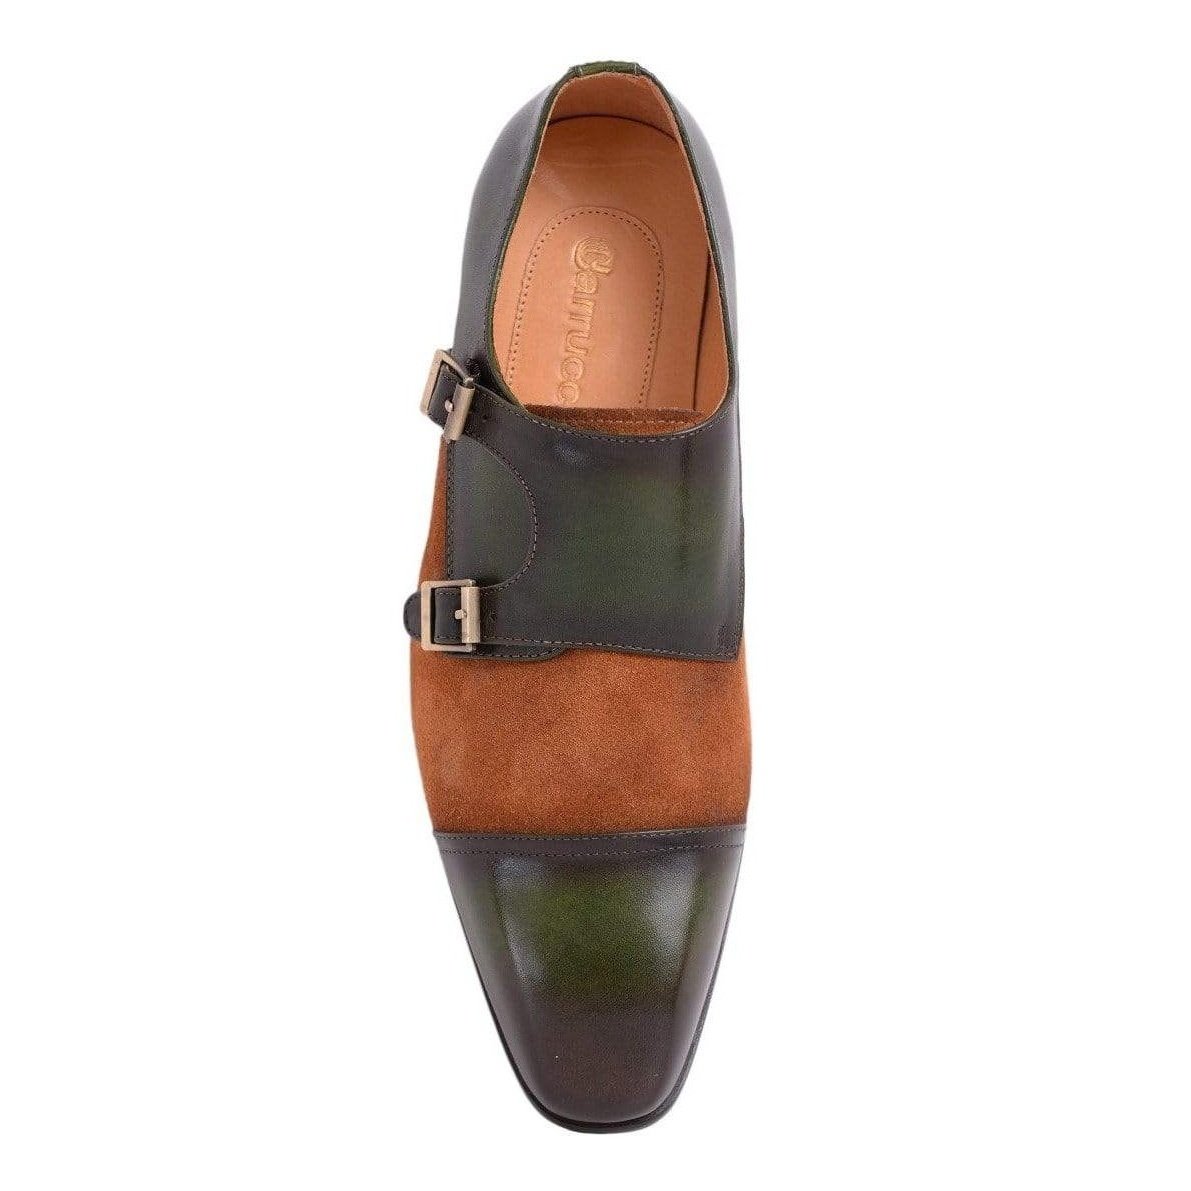 Carrucci SHOES Carrucci Green With Brown Suede Cap Toe Oxford Monk Strap Leather Dress Shoes